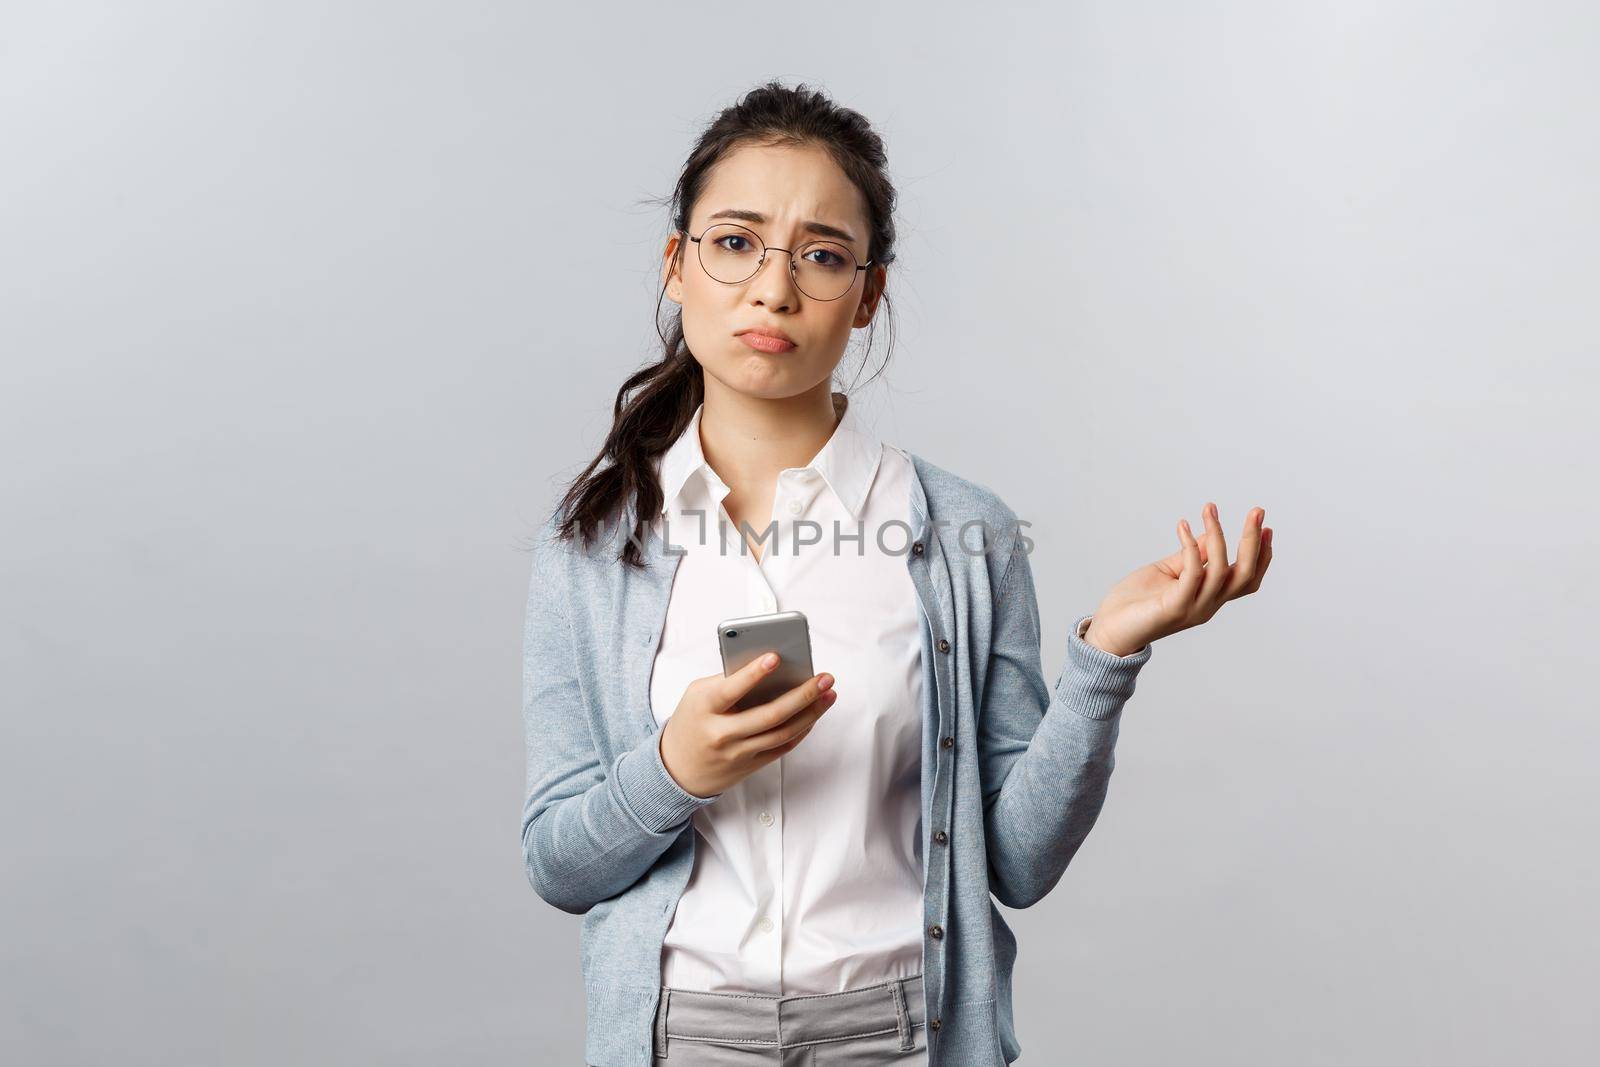 Office lifestyle, business and people concept. Gloomy indecisive and puzzled asian woman having proble, shrugging troubled and unsure, sighing, cant figure out how answer on message, use mobile phone.